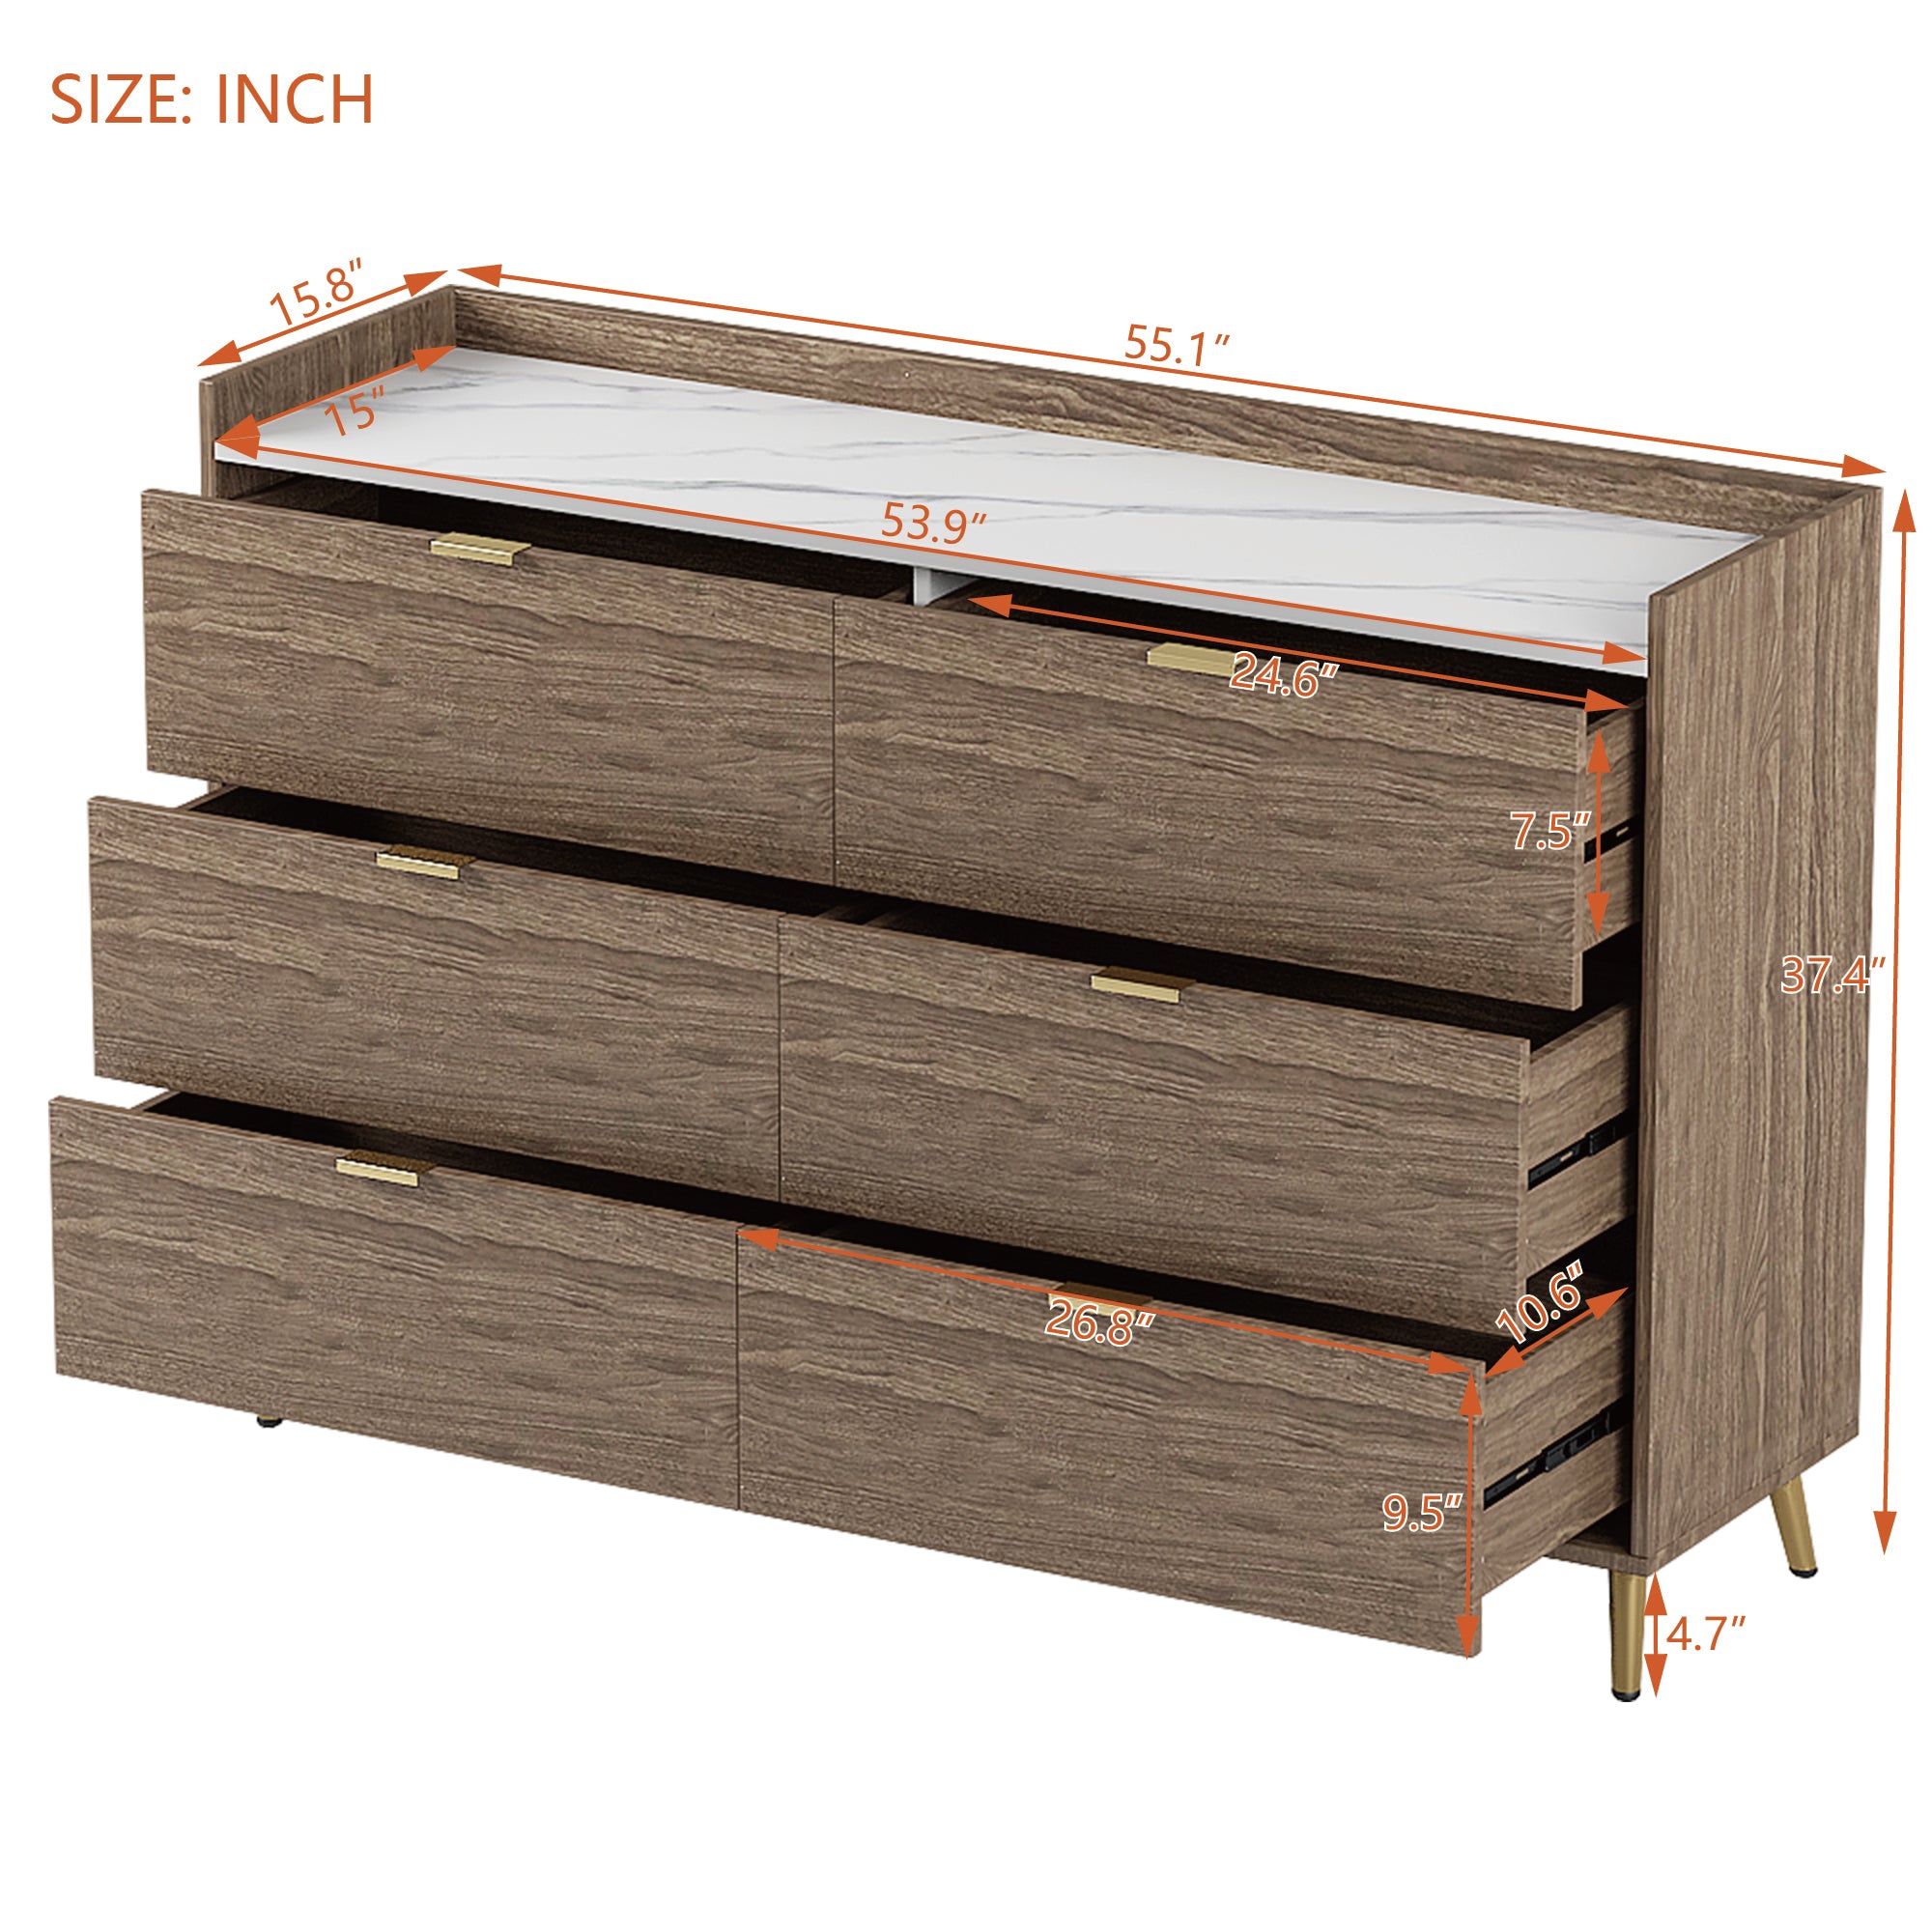 55" Long 6 Drawer Dresser with Marbling Worktop, Mordern Storage Cabinet with Metal Leg and Handle - Walnut